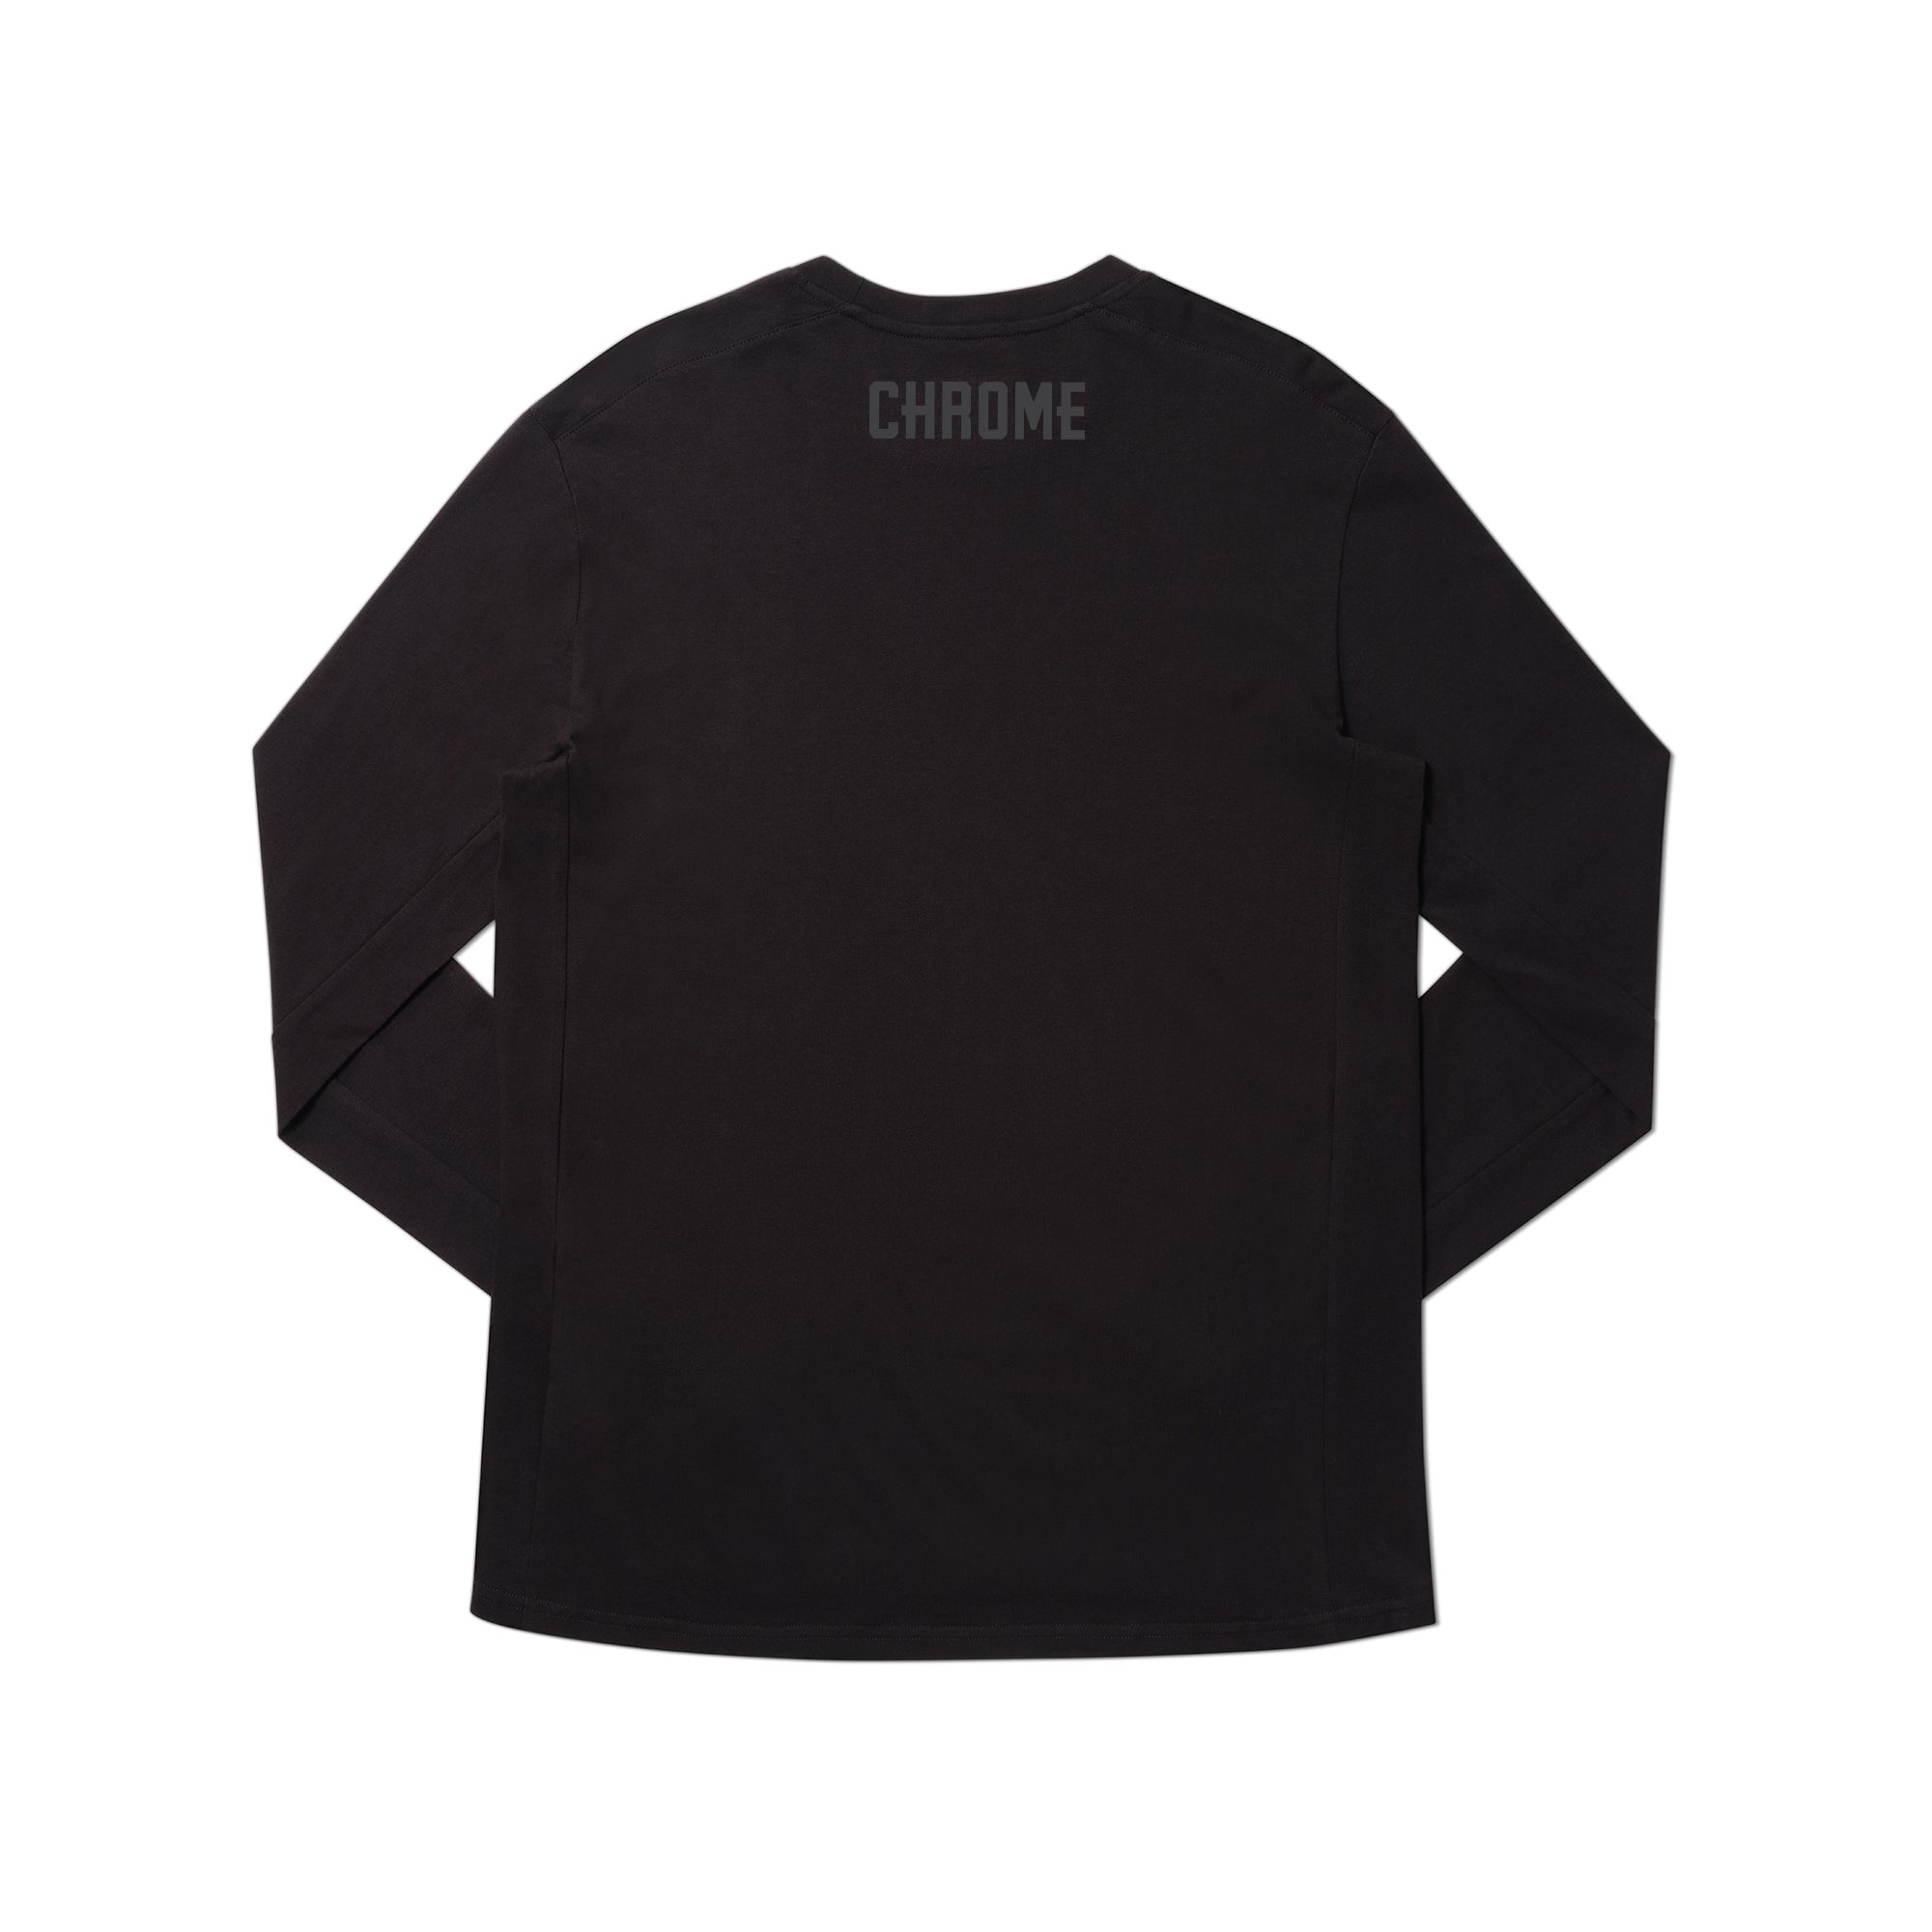 Chrome checkerboard logo tee long sleeve in black back of the shirt #color_black